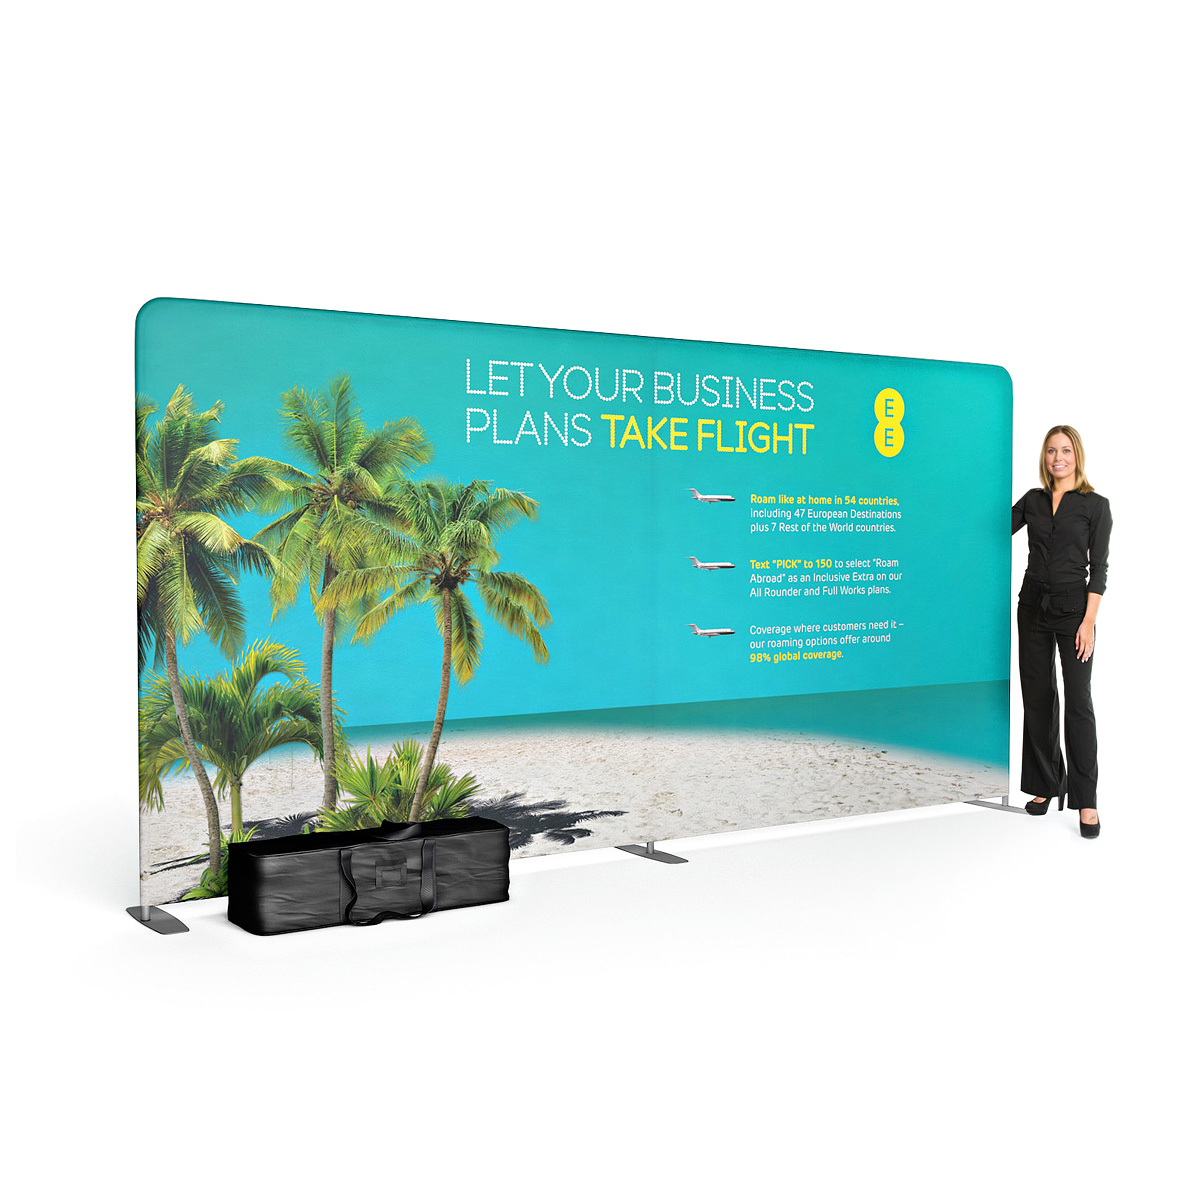 FABRIWALL® Fabric Display Exhibition Stand 4m x 2m